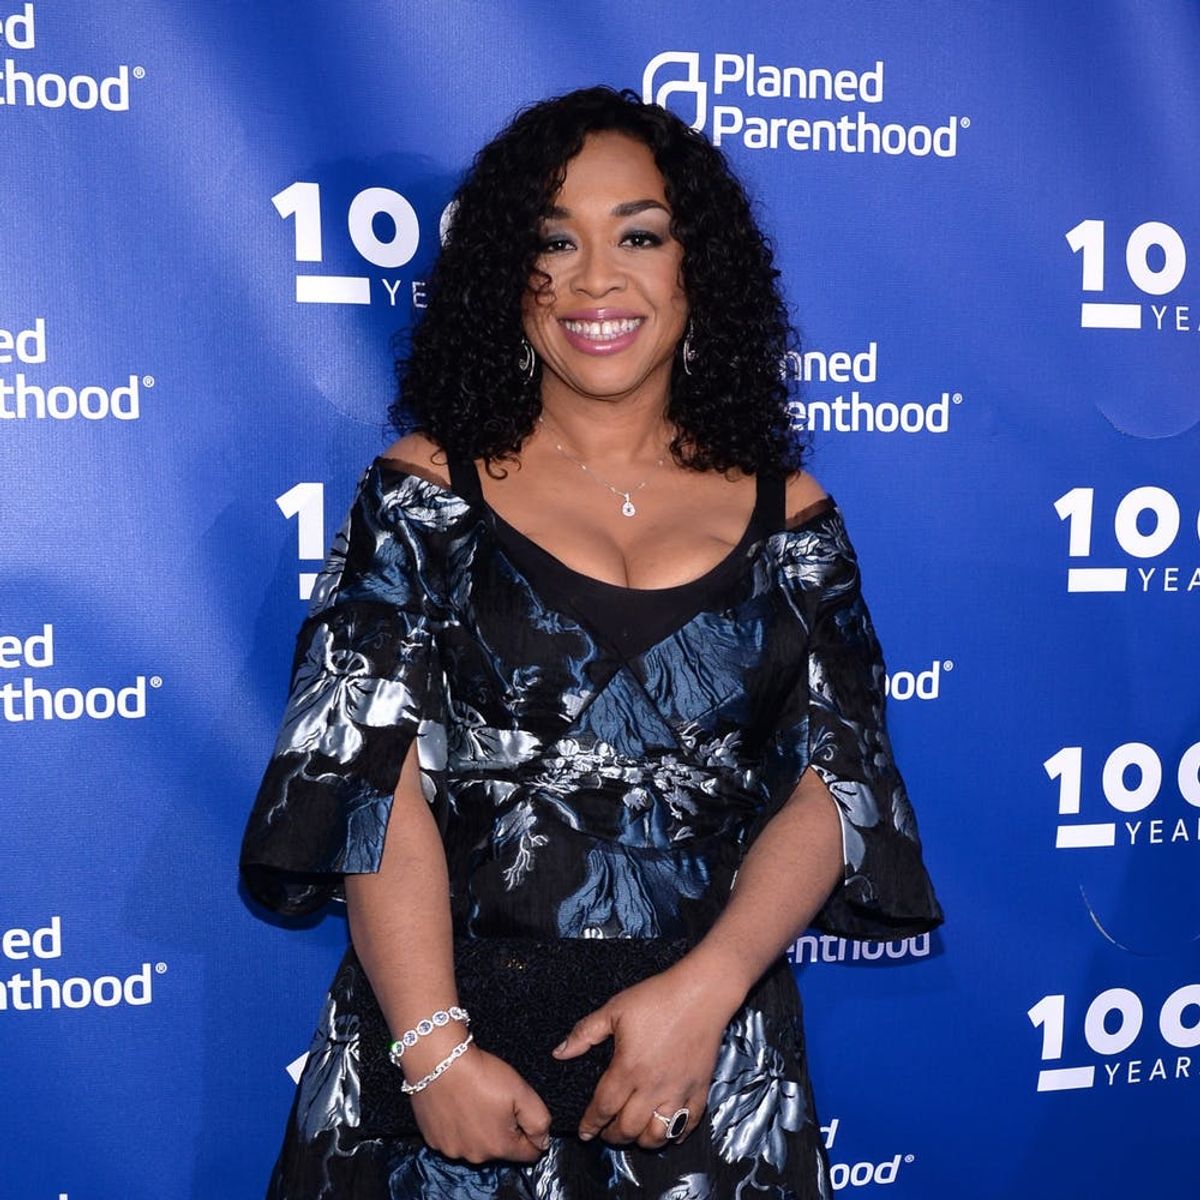 Here’s How Shonda Rhimes’ Netflix Originals Could Be Different from Her Other TV Shows